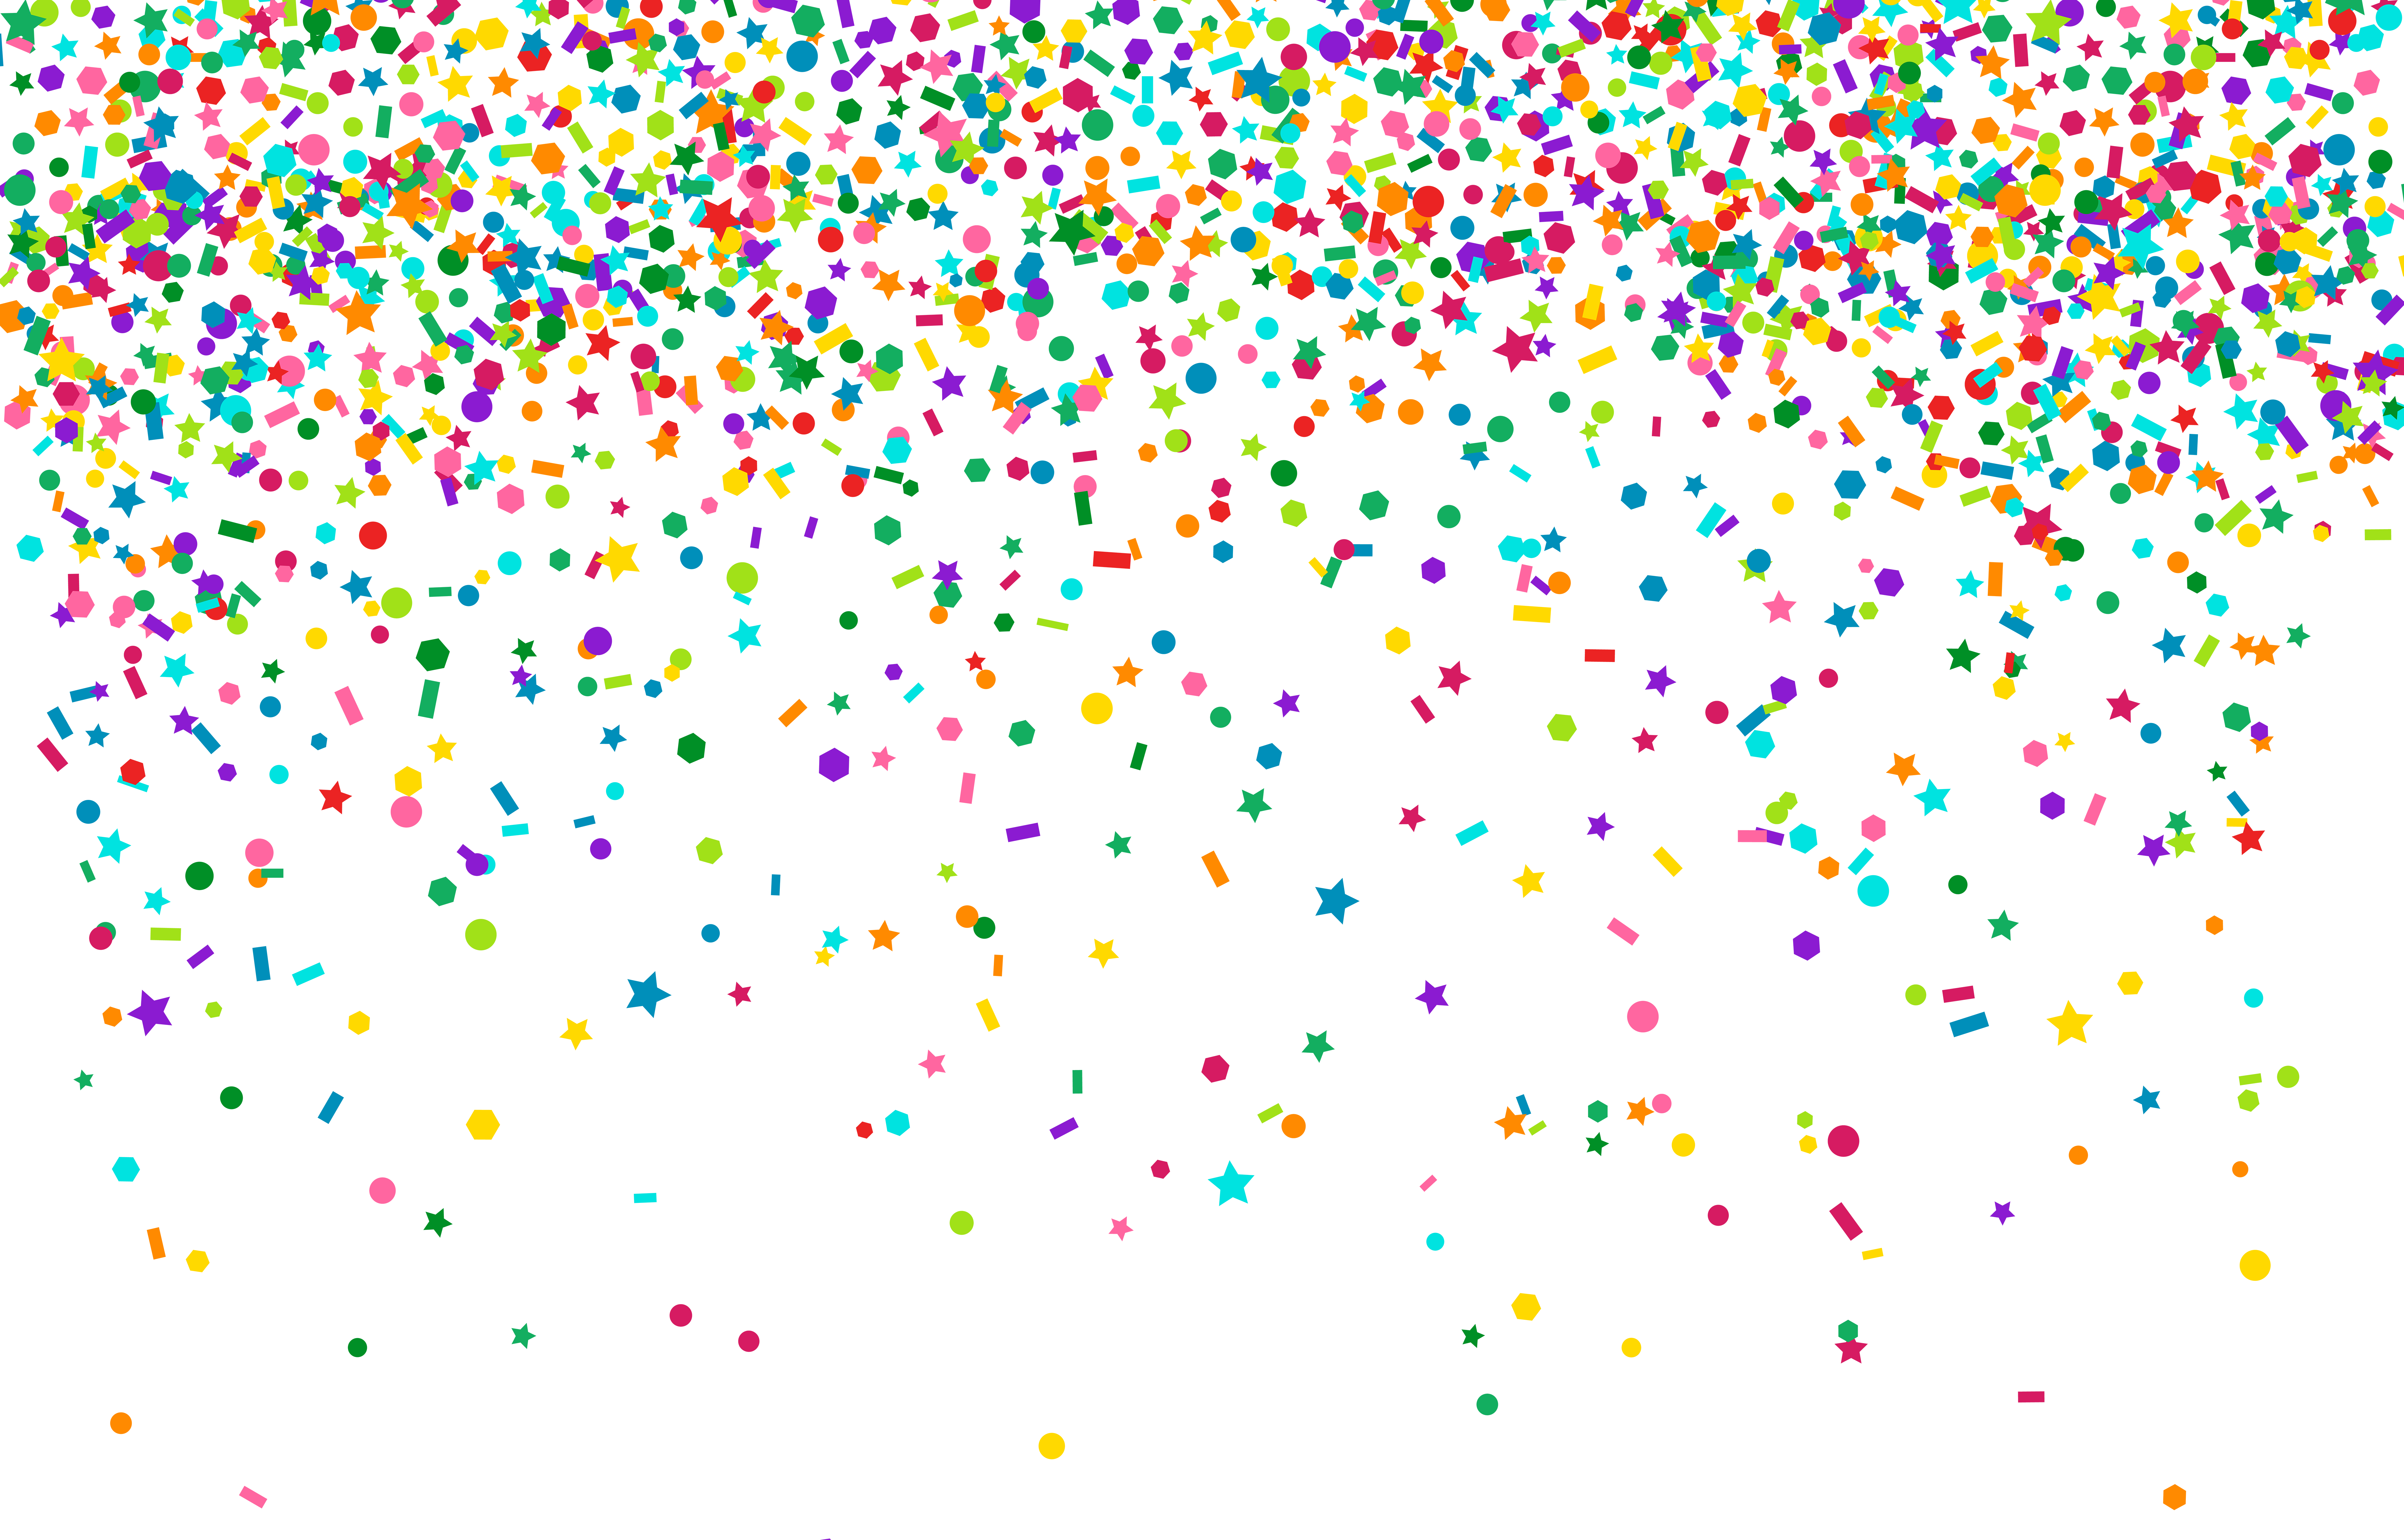 Confetti clipart emoji for free download and use images in.